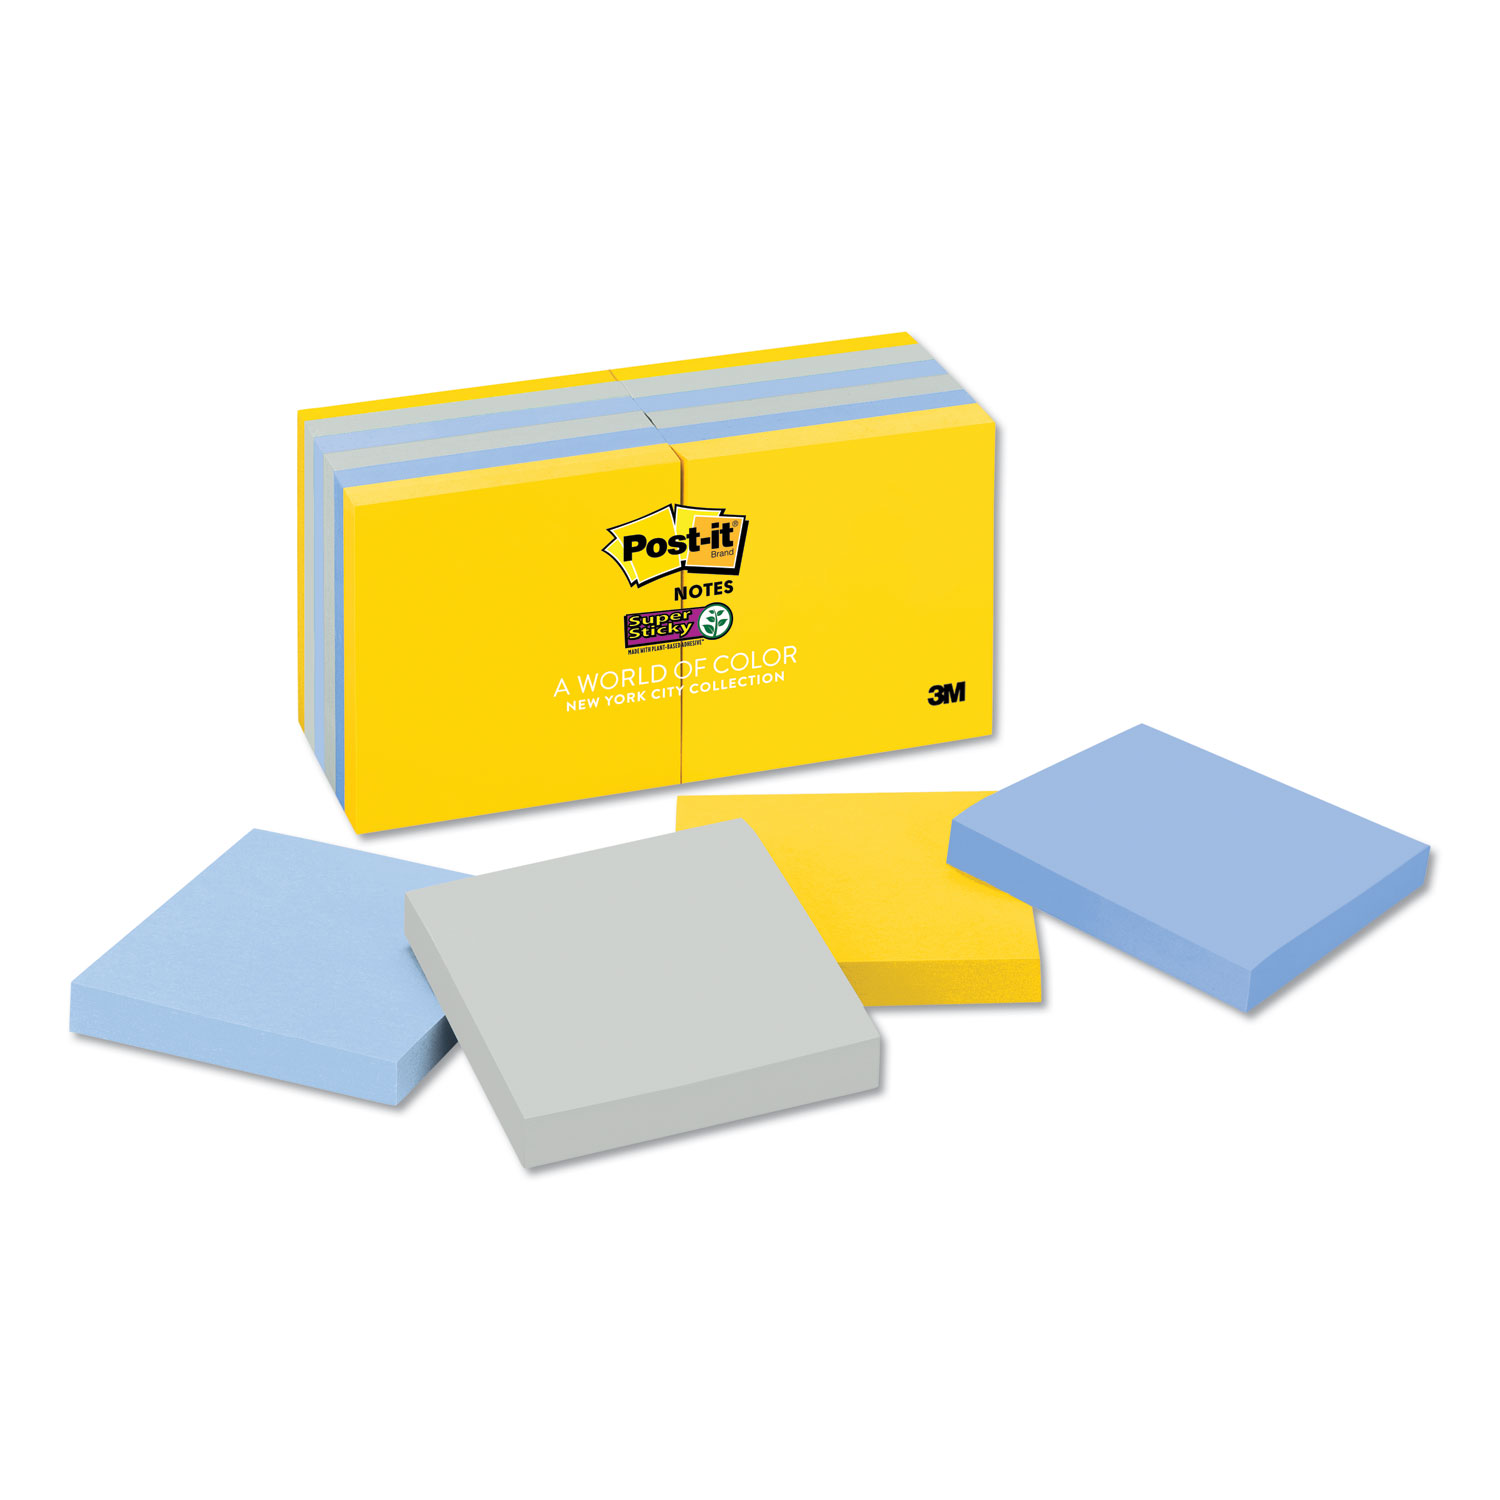  Post-it Notes Super Sticky 65412SSNY Pads in New York Colors Notes, 3 x 3, 90-Sheets/Pad, 12 Pads/Pack (MMM65412SSNY) 